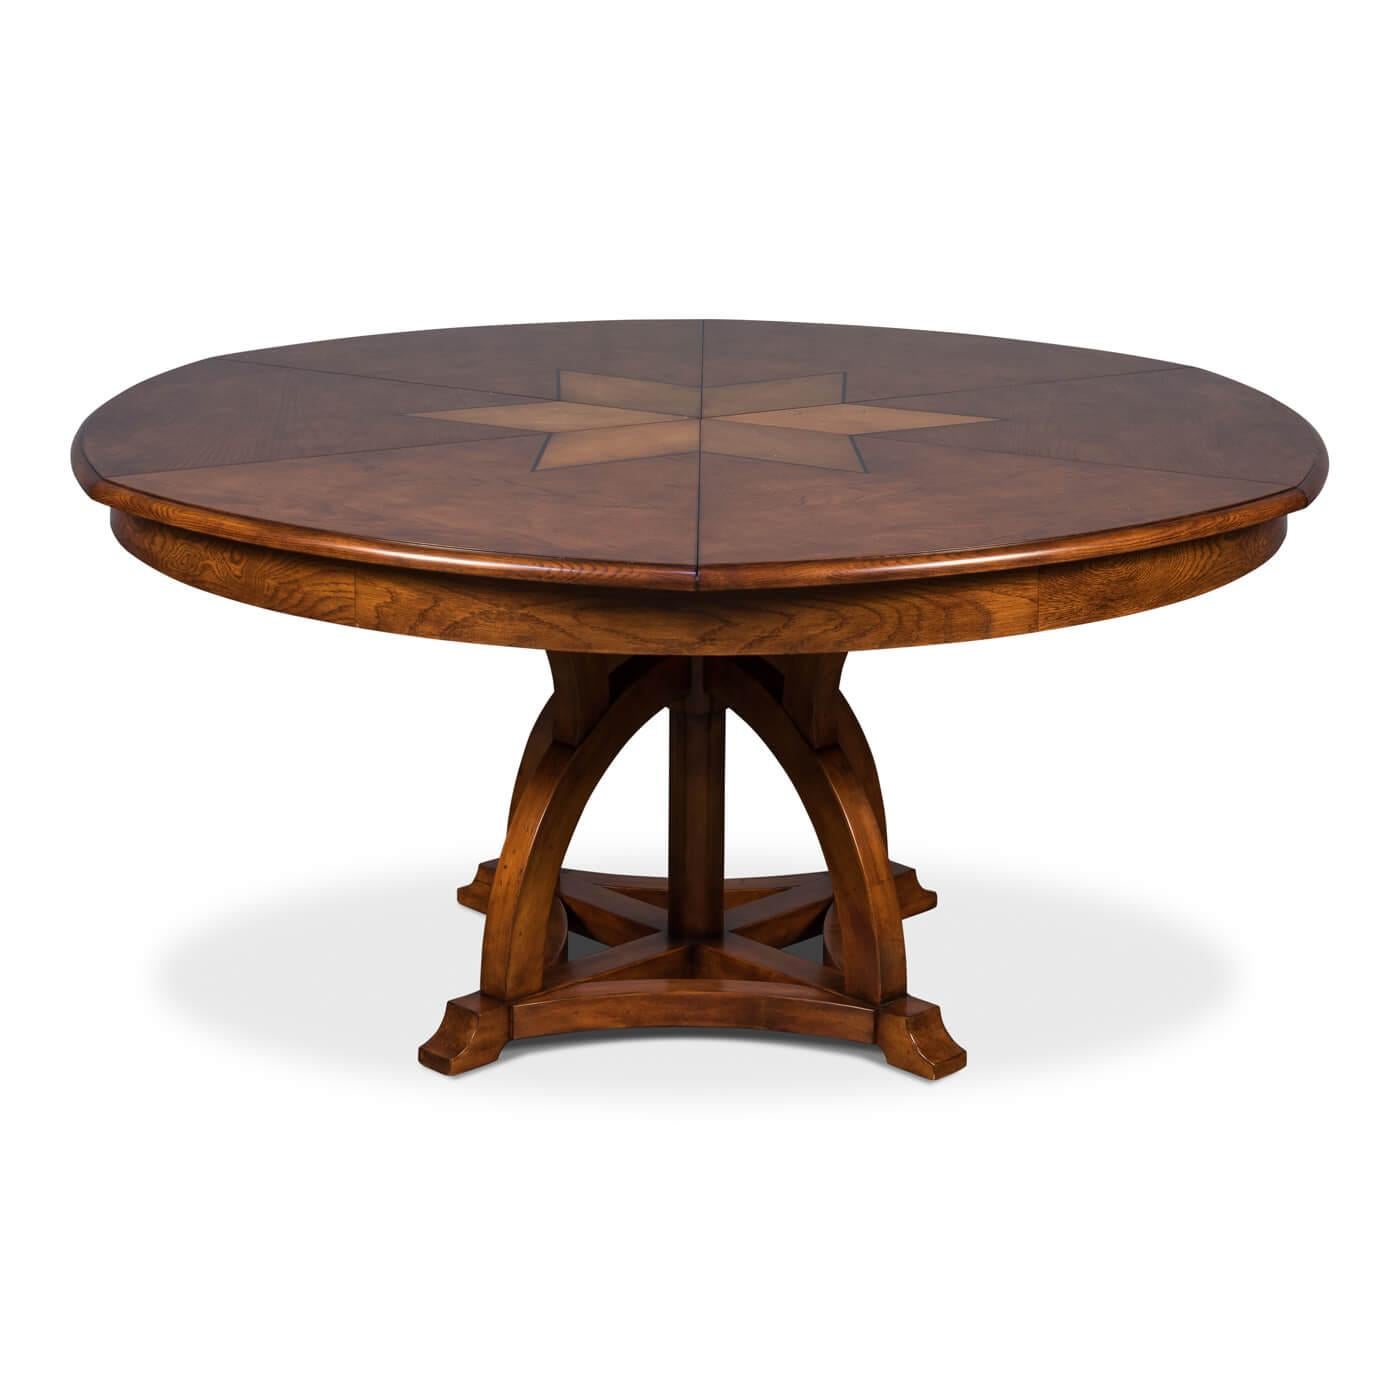 Round walnut extension dining table. The tabletop features a beautiful star design constructed of walnut and white oak veneer, and it sits upon a base inspired by timber frame architecture.

This dining table has self-storing leaves and can easily